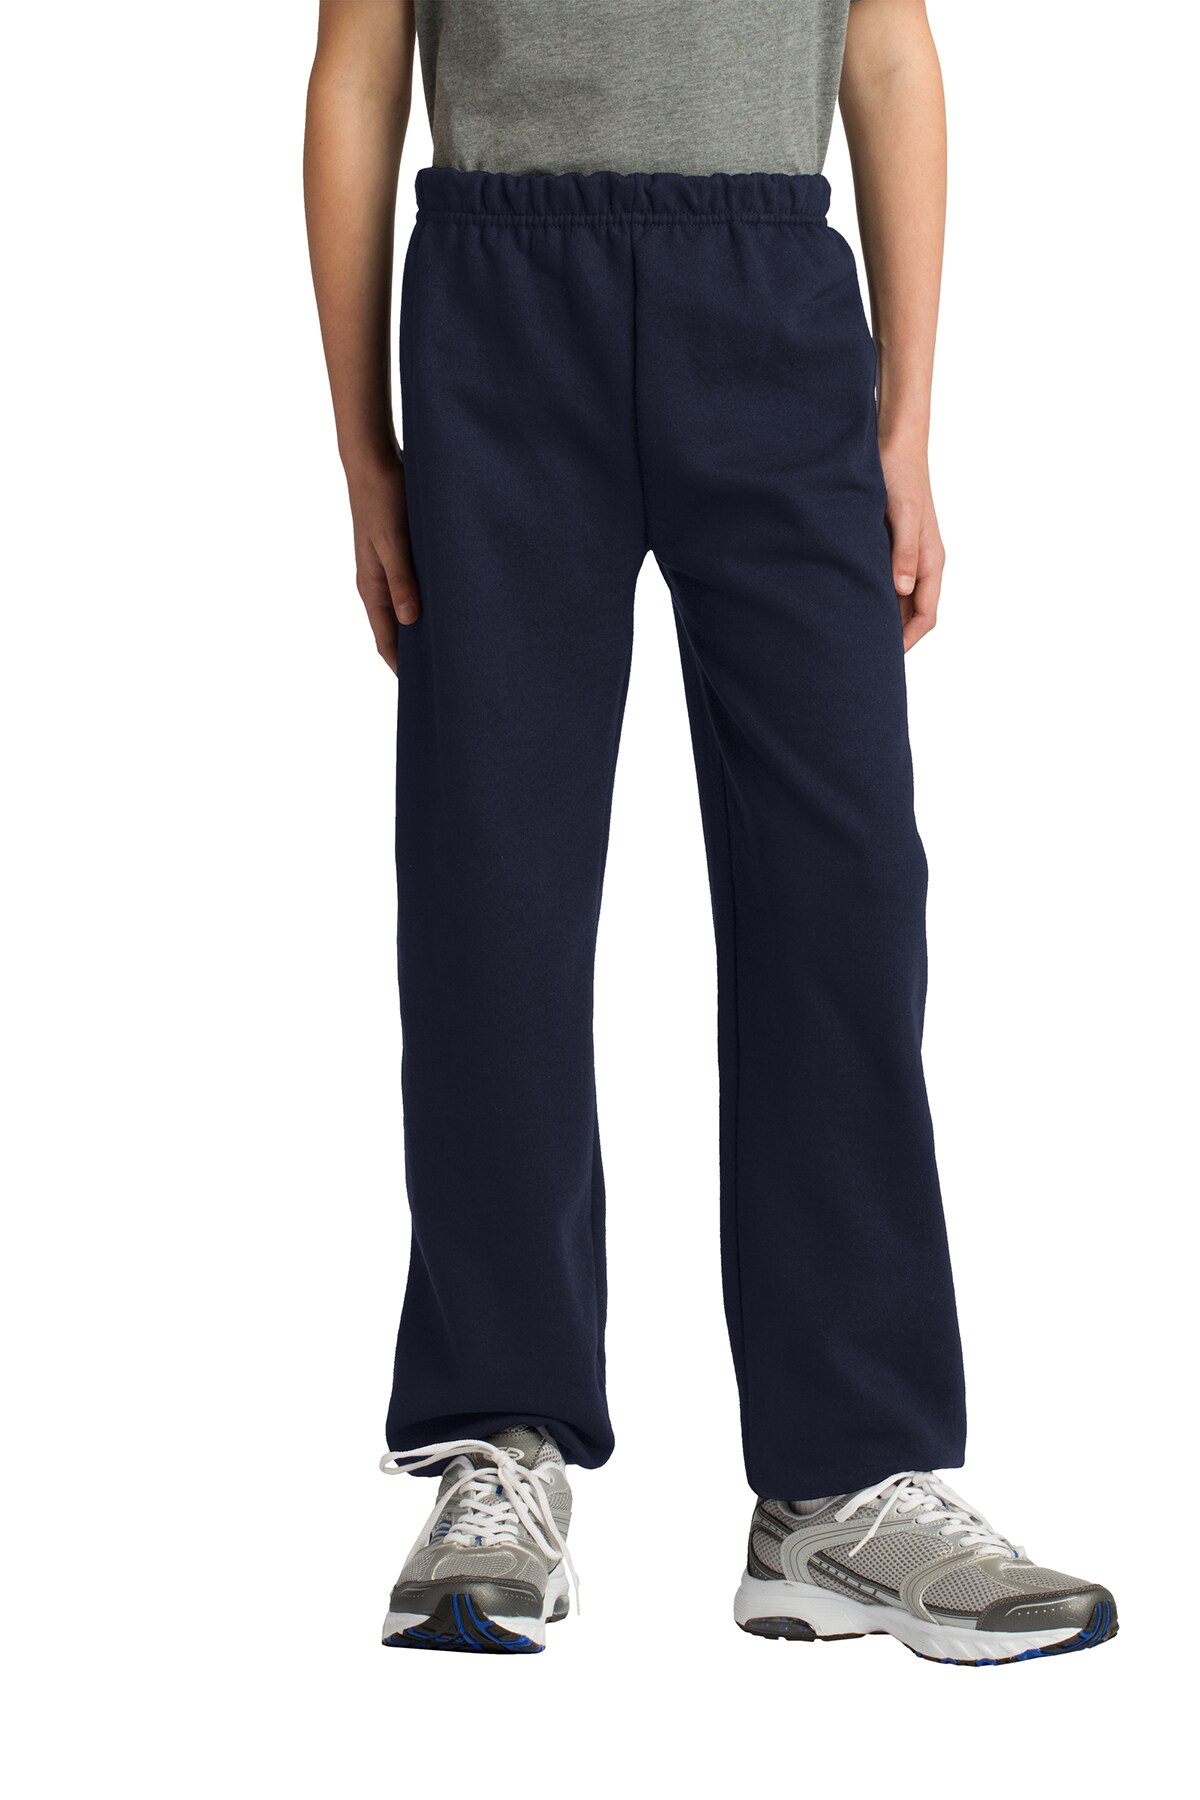 Gildan&#xAE; - Youth Heavy Blend Sweatpant -18200B | Crafted with an 8-ounce blend of 50% cotton and 50% polyester Trendy Junior Fleece Joggers | Combining quality materials with thoughtful design elements for a cozy and secure fit